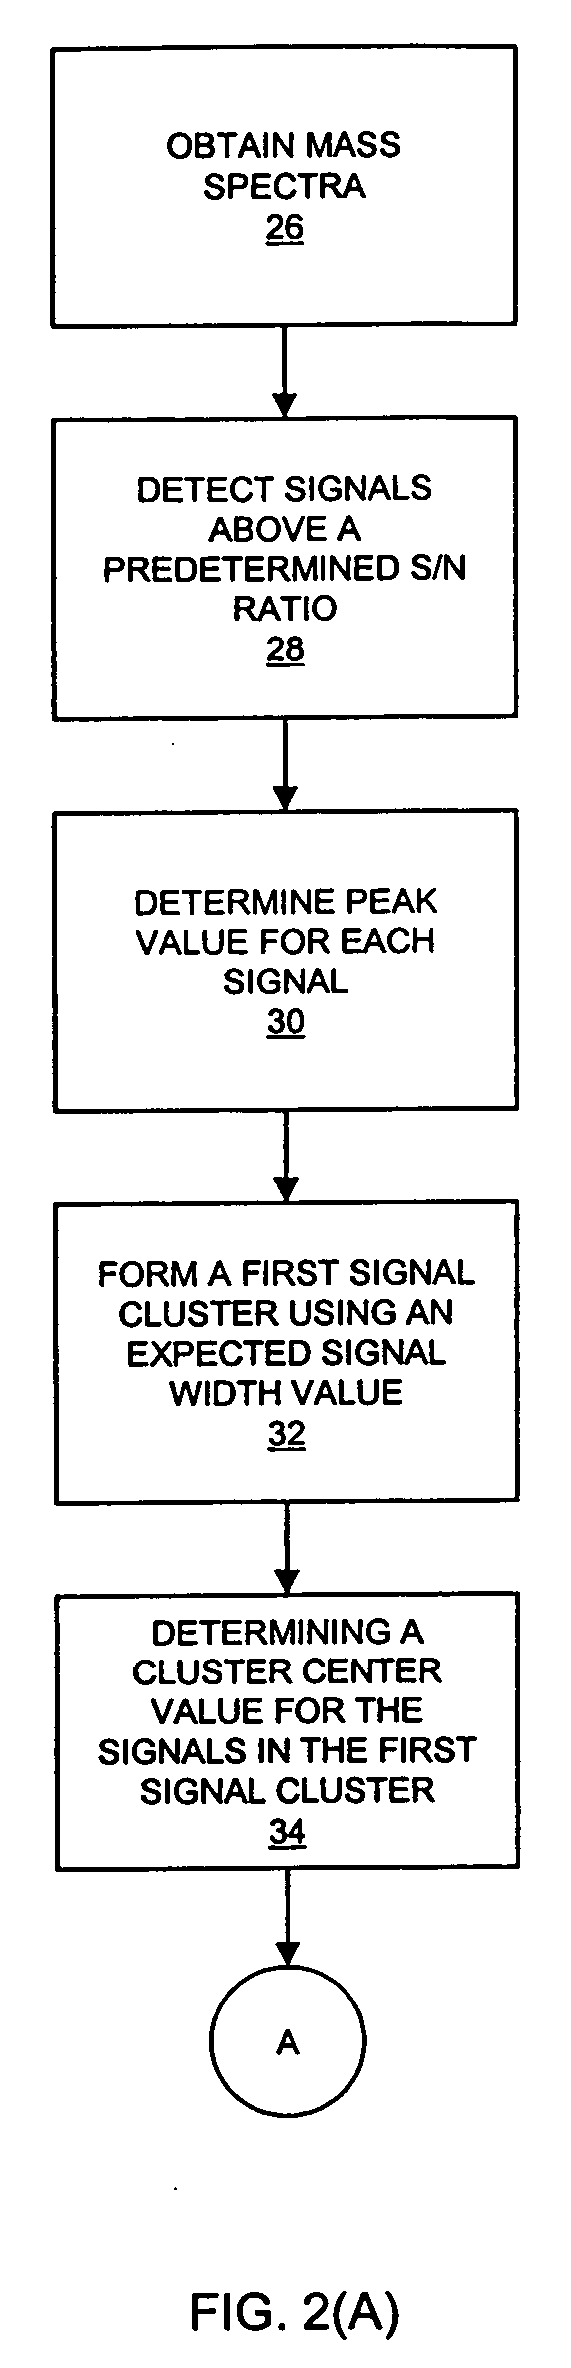 Method for clustering signals in spectra